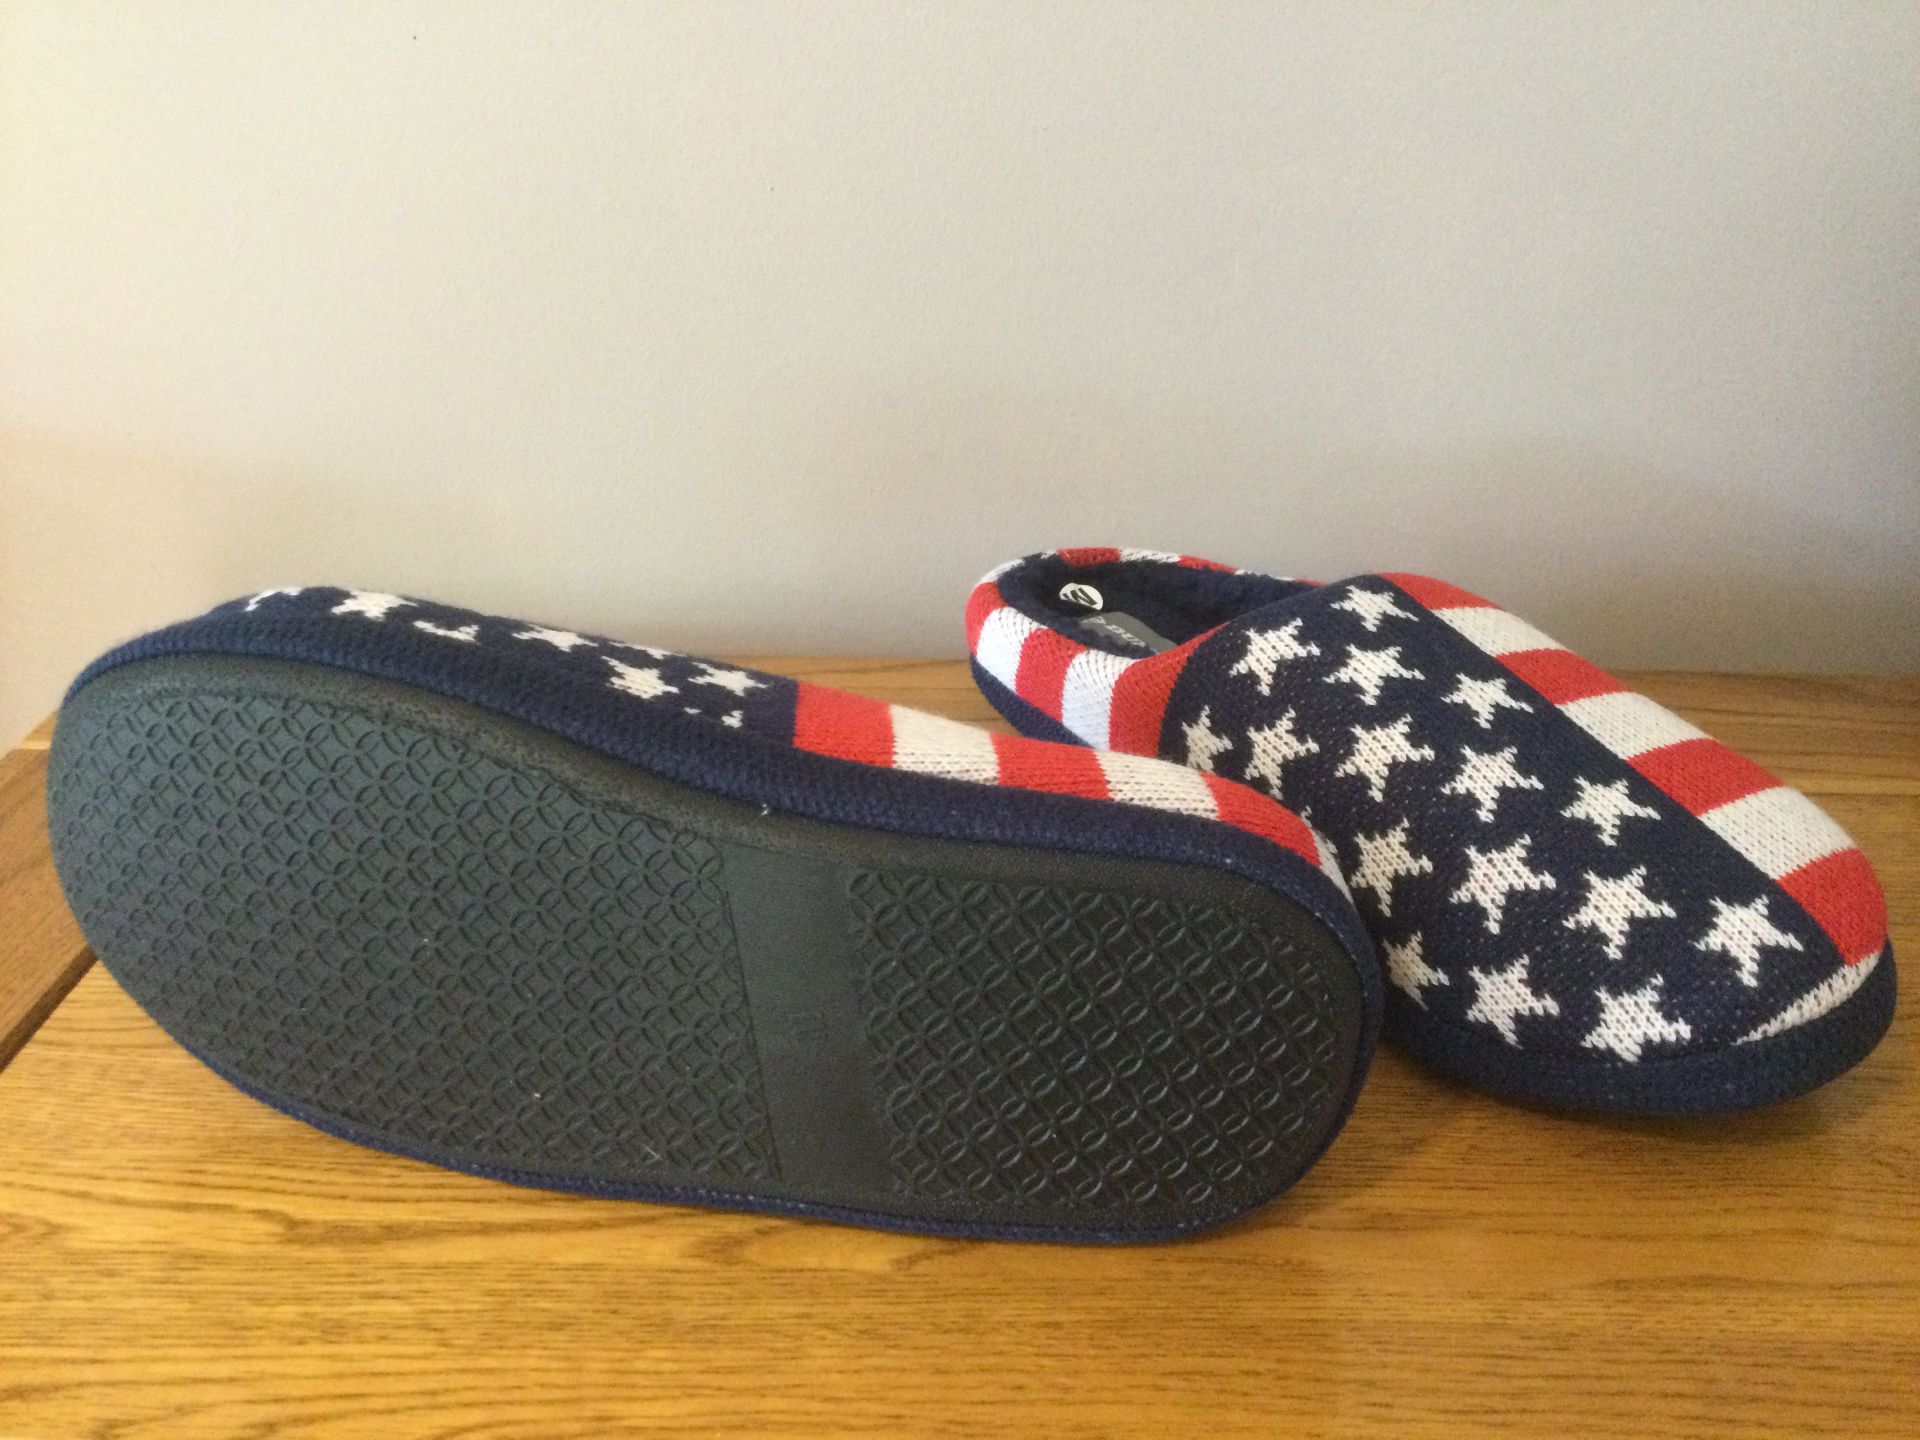 Men's Dunlop, “USA Stars and Stripes” Memory Foam, Mule Slippers, Size M (8/9) - New - Image 4 of 5